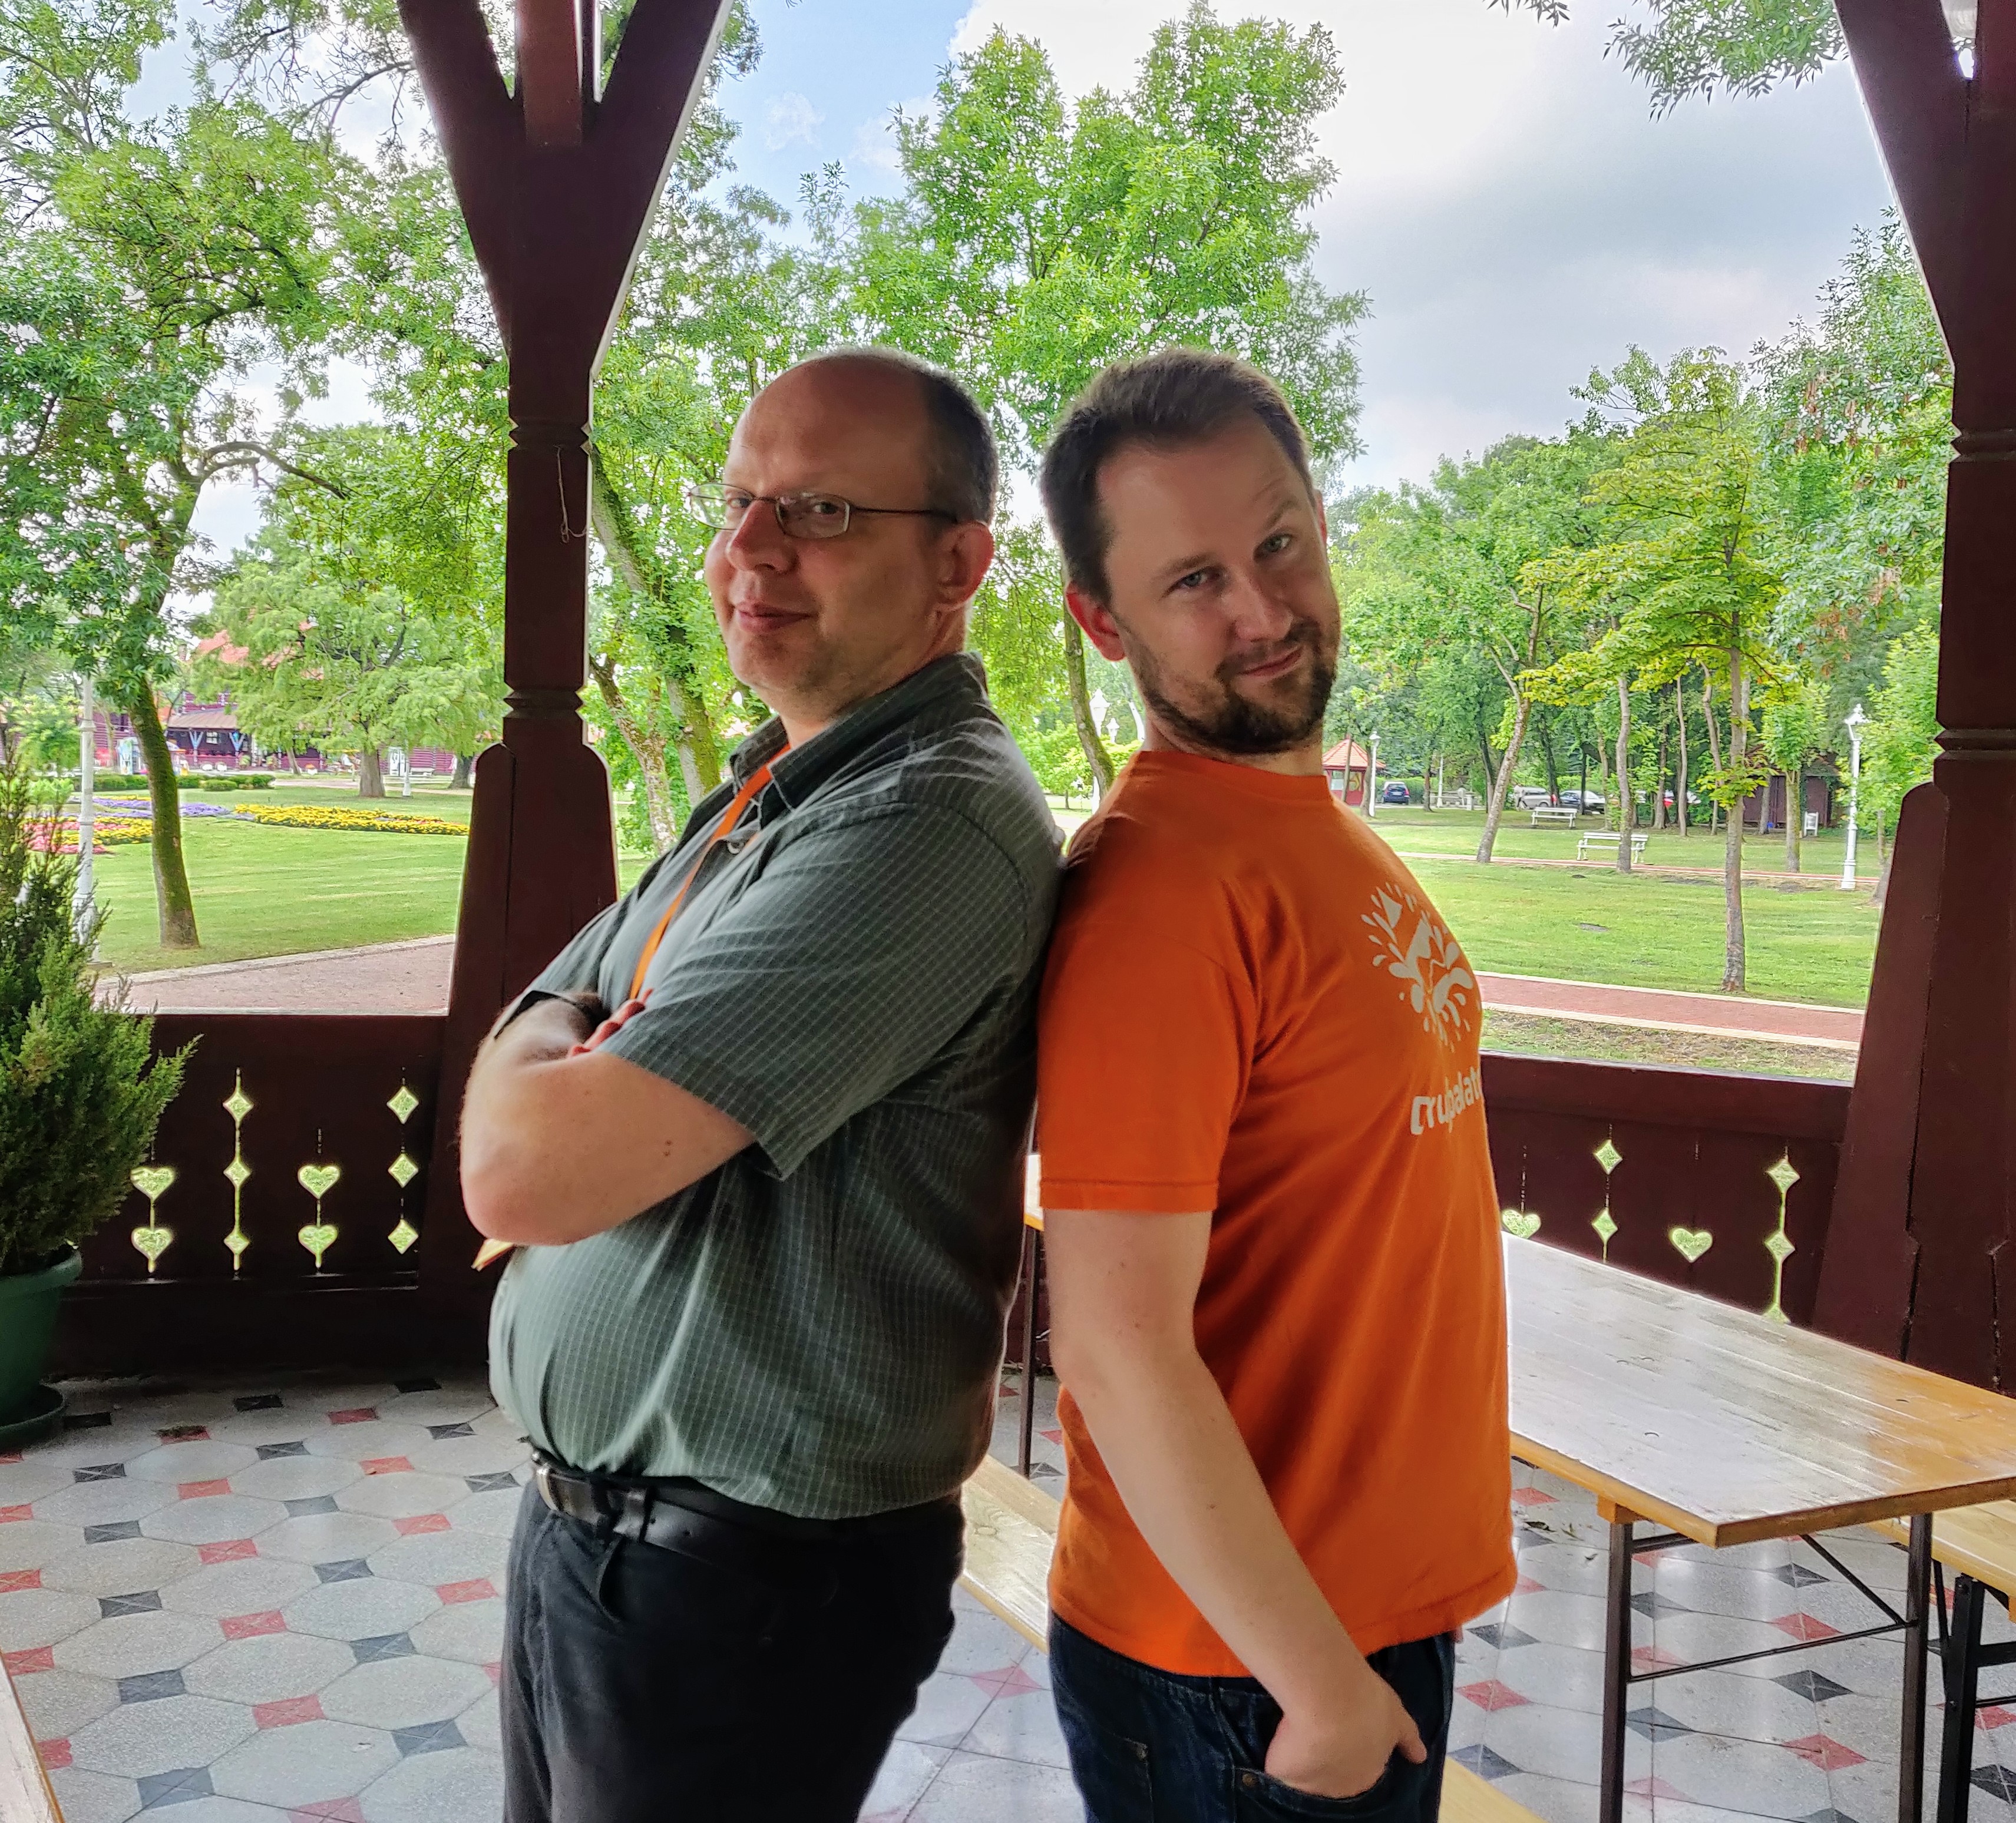 The two Hungarian Drupal friends, PP and Gábor - Photo by varejulcsa